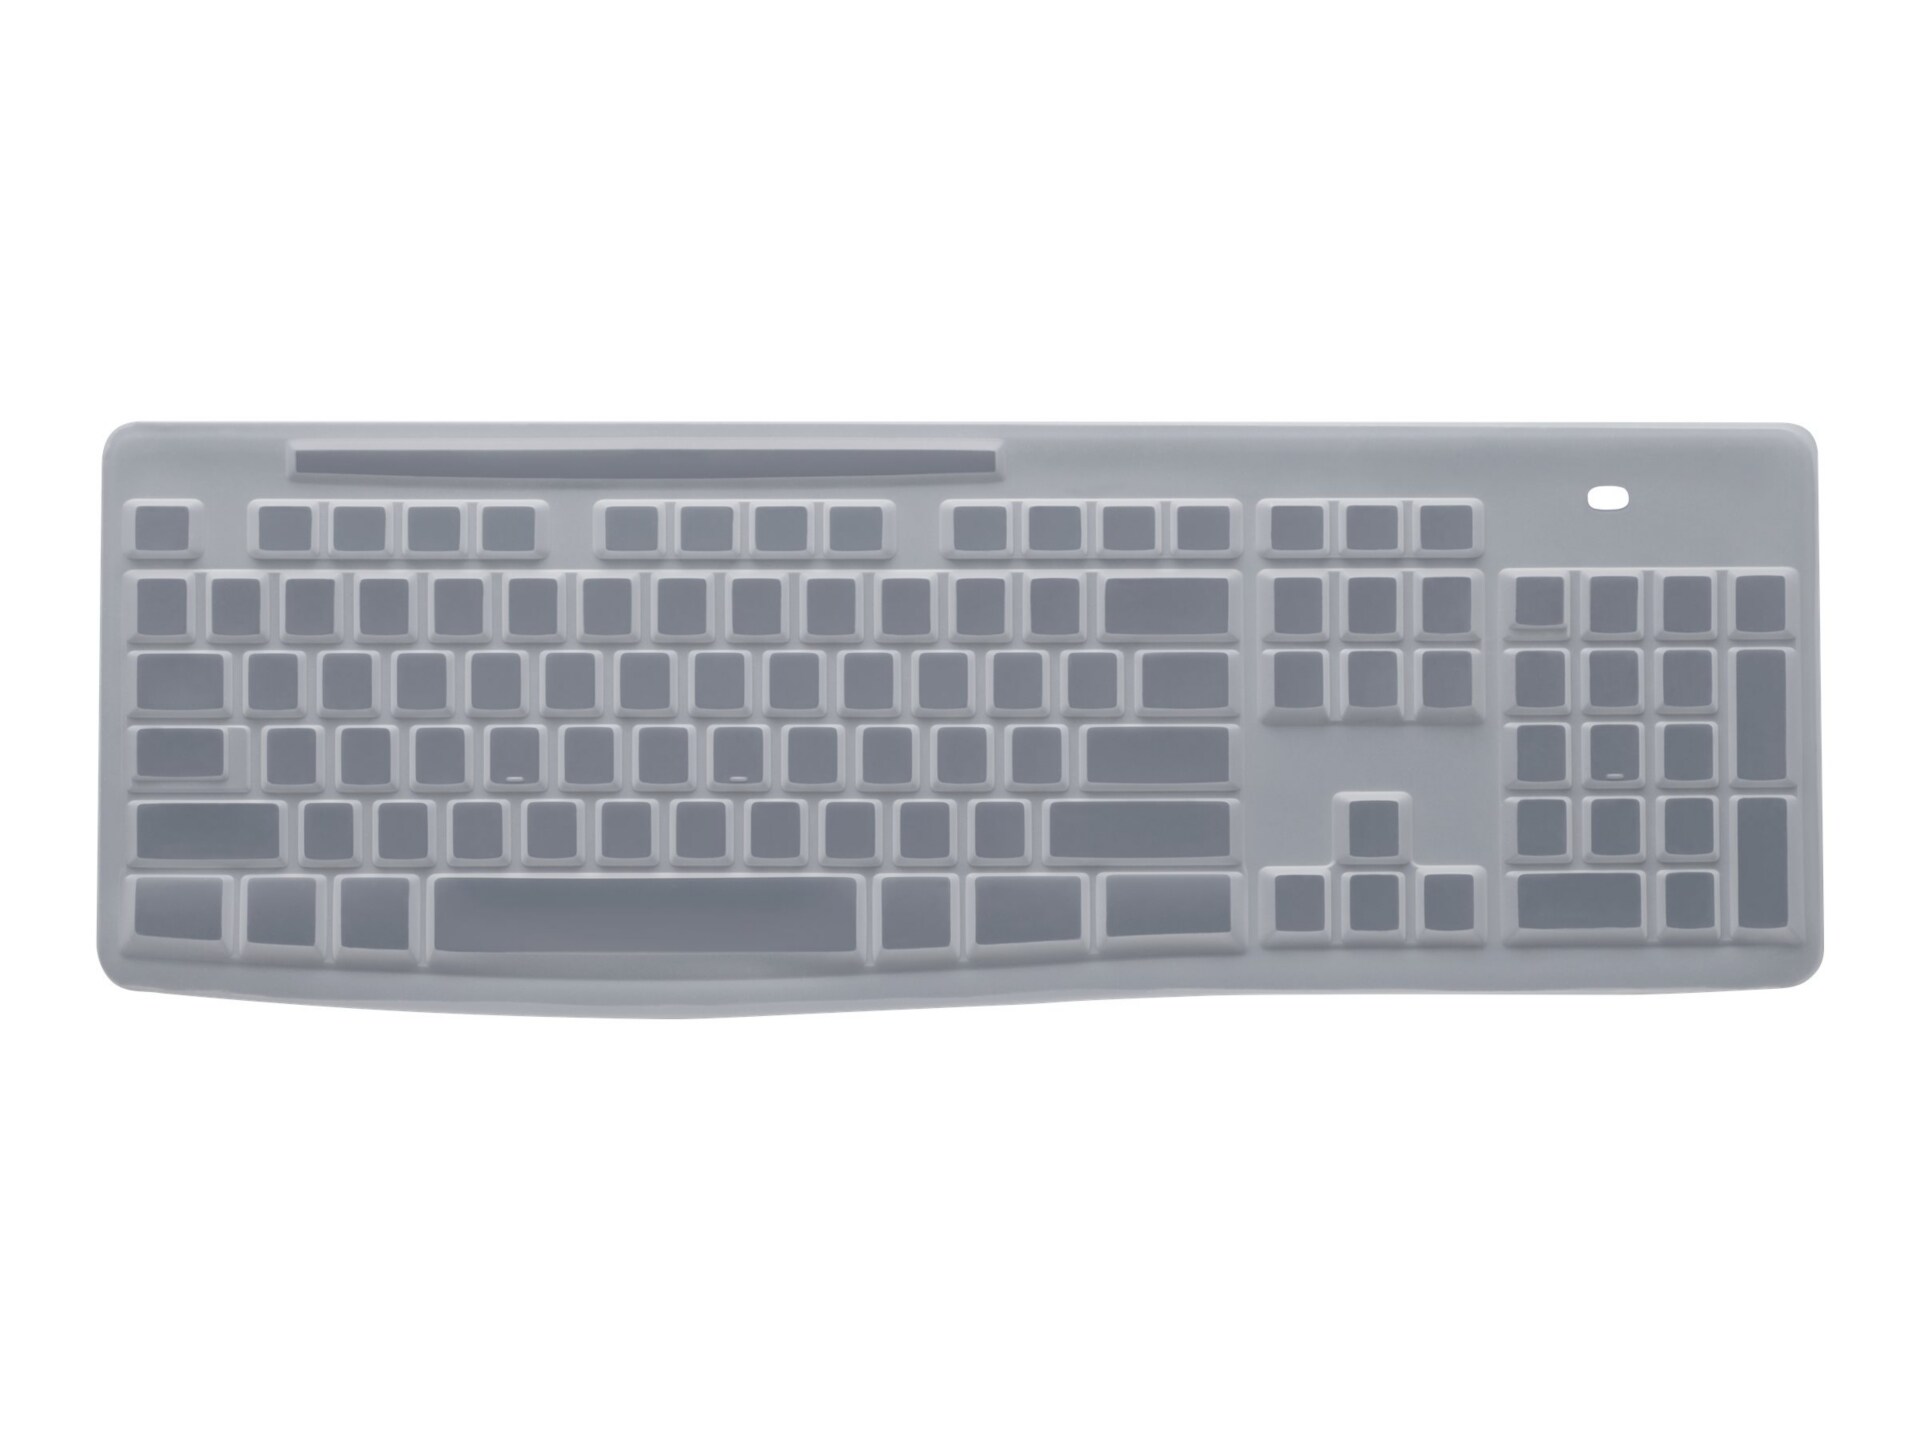 Logitech Protective Cover for K270 Keyboard for Education - protège-clavier